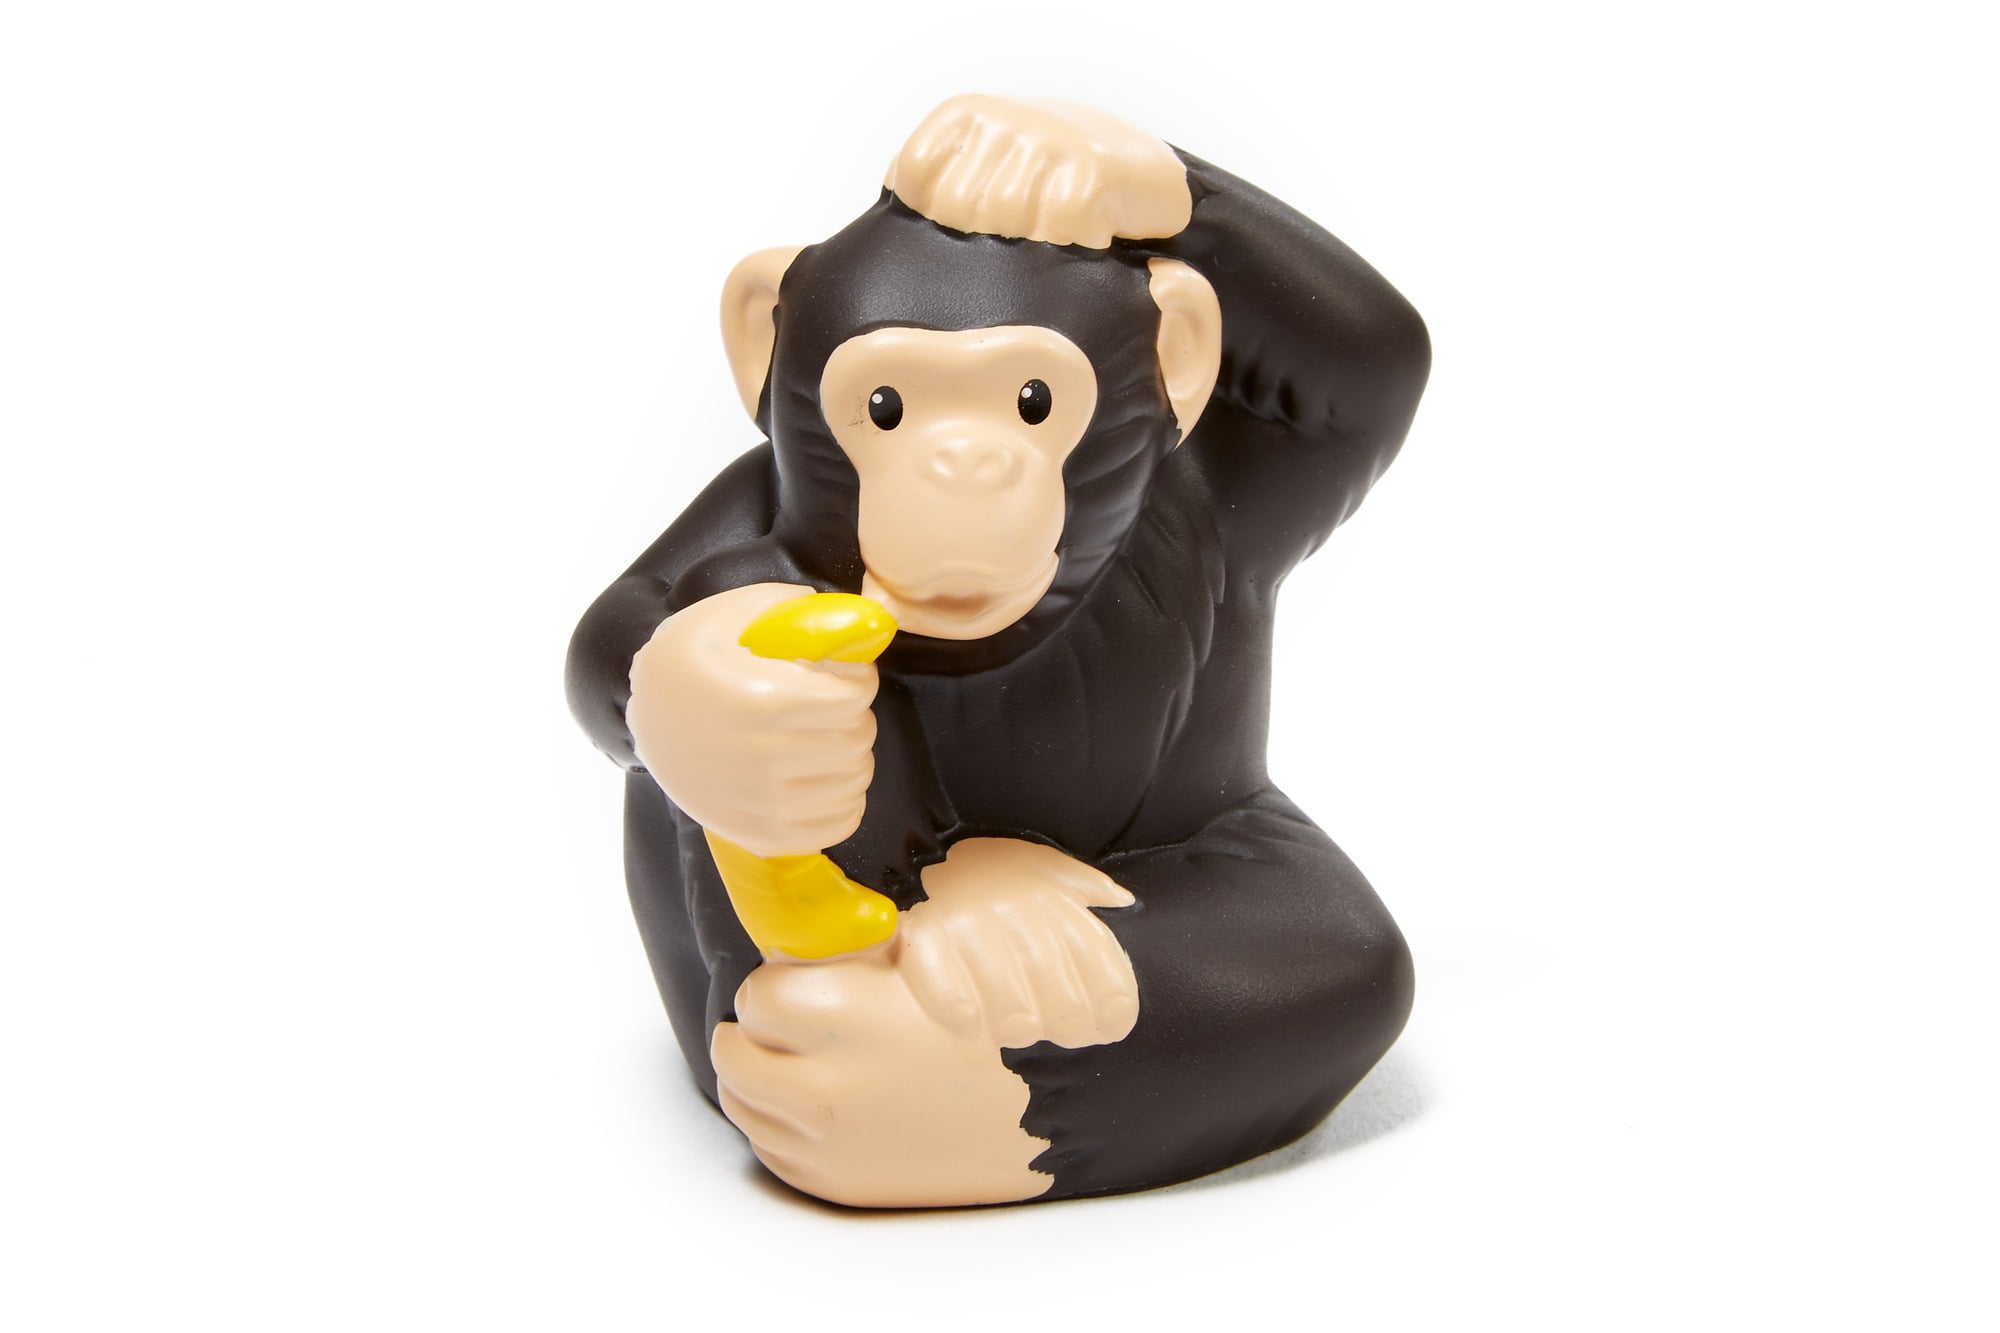 Details about   Fisher Price Little People BROWN MONKEY CHIMPANZEE for Safari Zoo Precious! 